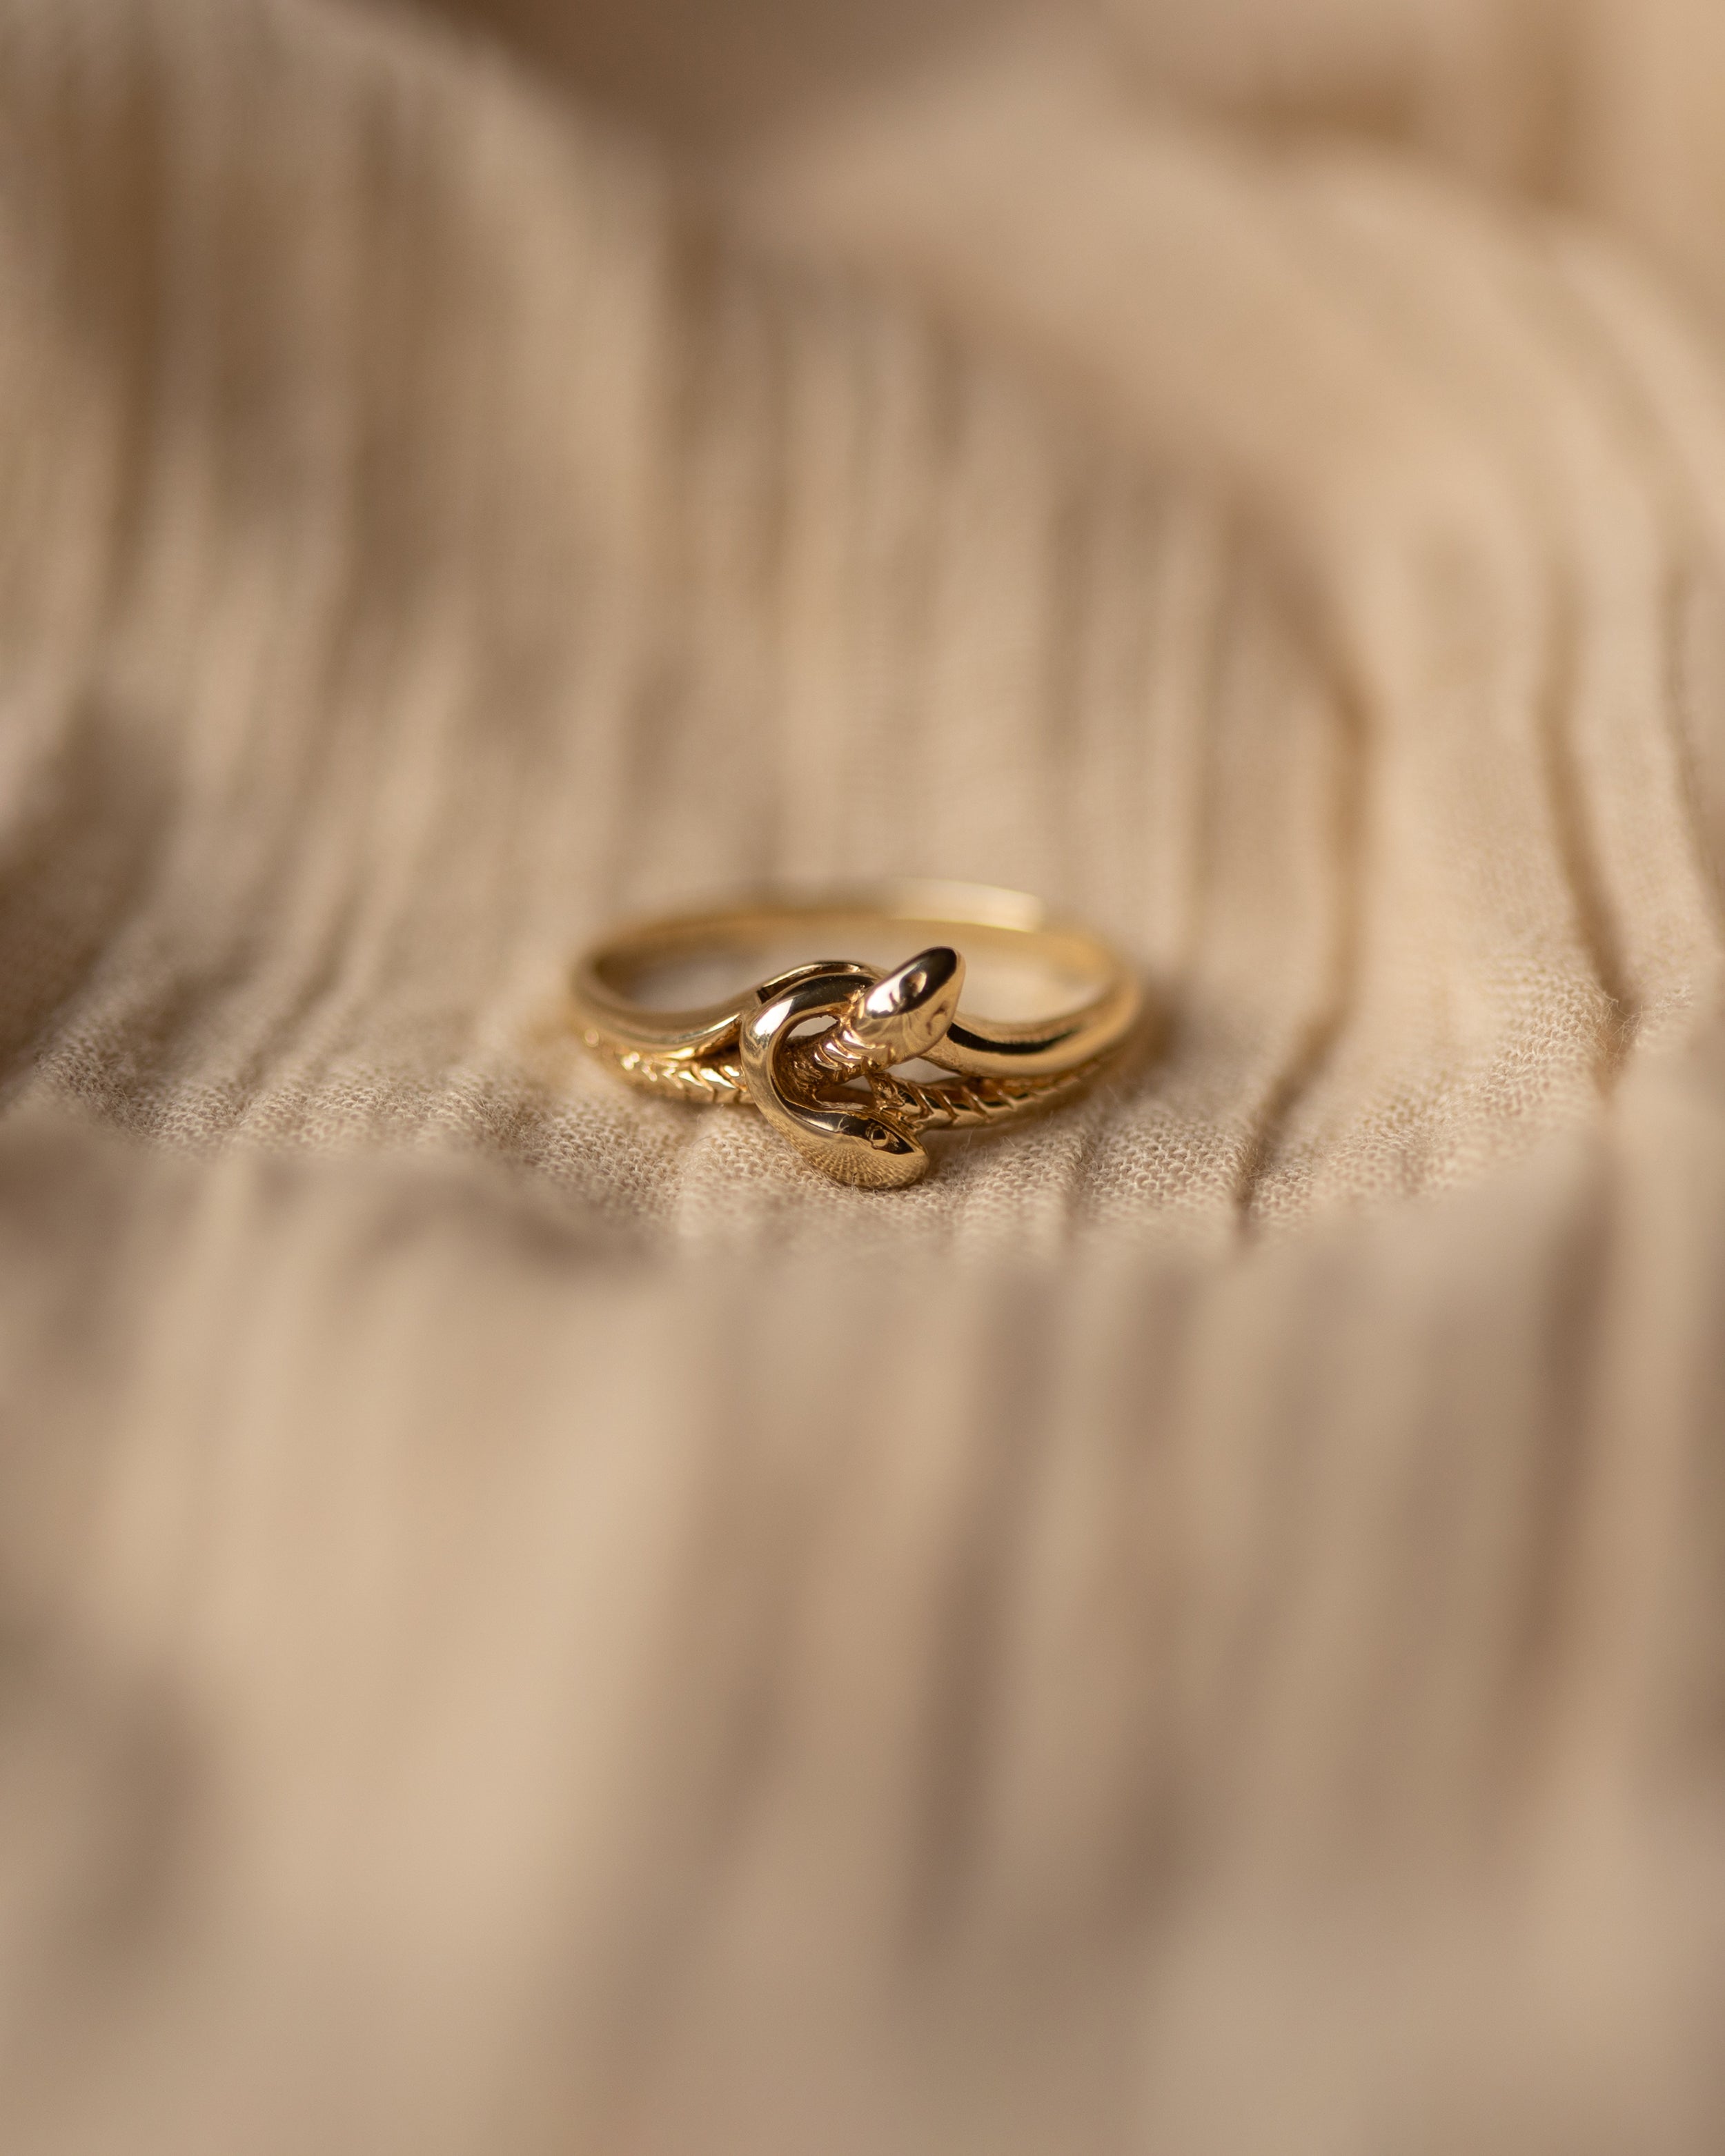 Irma 1988 Vintage 9ct Gold Double Snake Ring